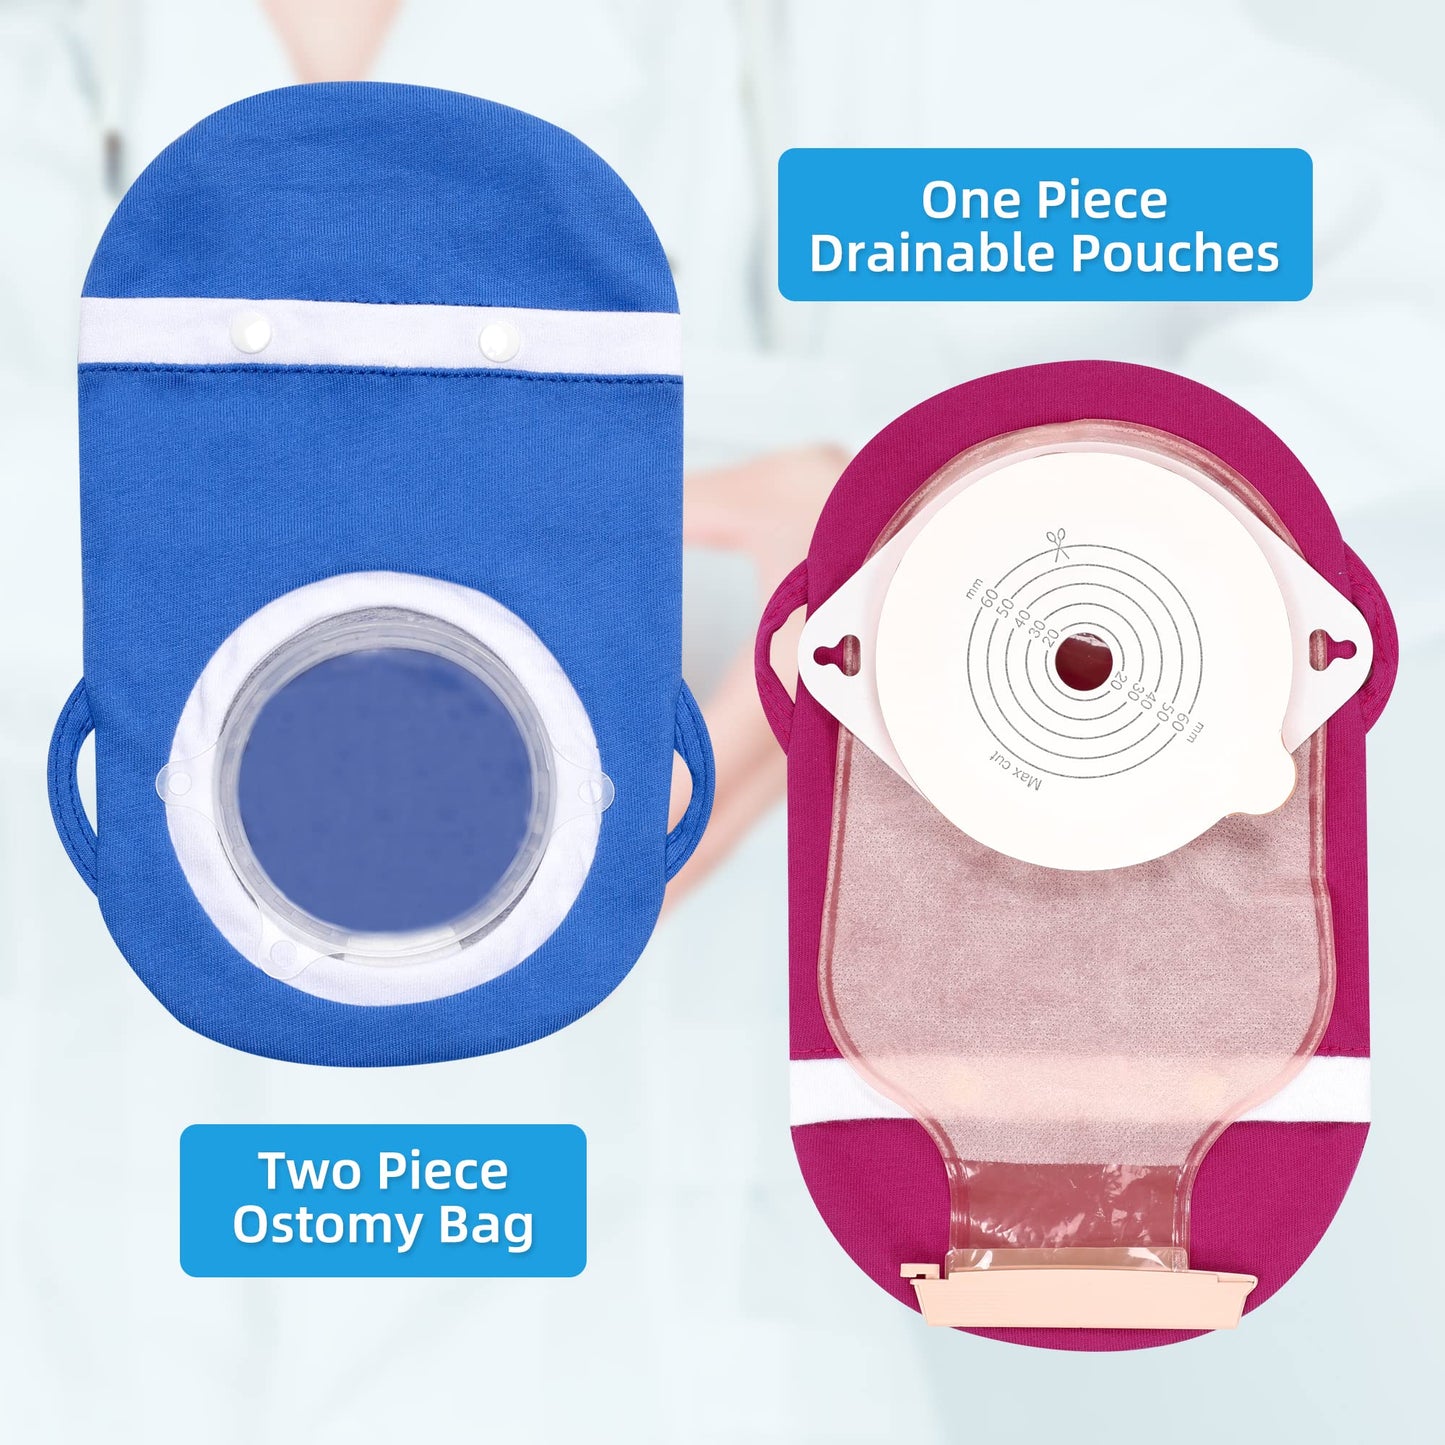 Fewener Ostomy Bag Covers Kit - 3Pcs Colostomy Bag Covers for Women with Adjustable Belt, Odor Reducing Ostomy Pouch Covers, 3.5inch Round Opening Colostomy Bag Covers for Men, Ileostomy, Washable